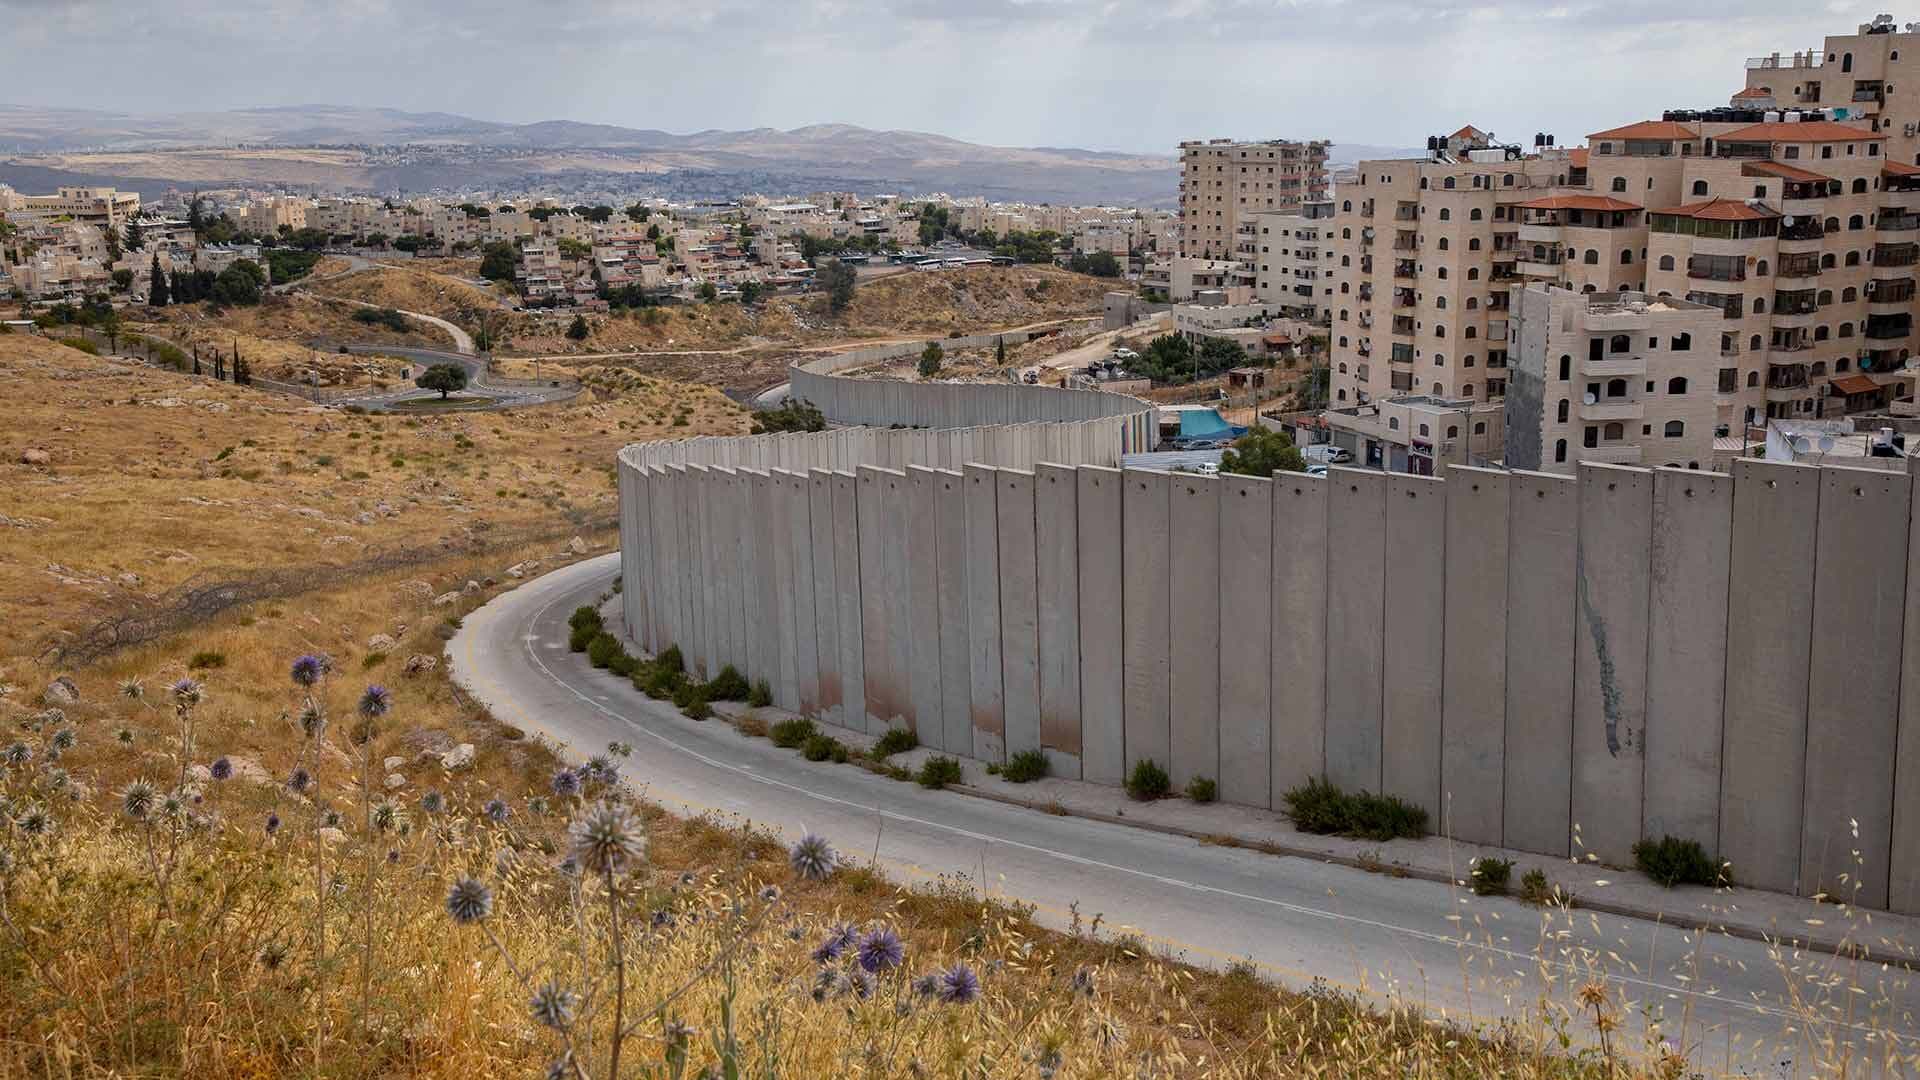 the Shuafat refugee camp is seen behind a section of Israel's separation barrier in Jerusalem